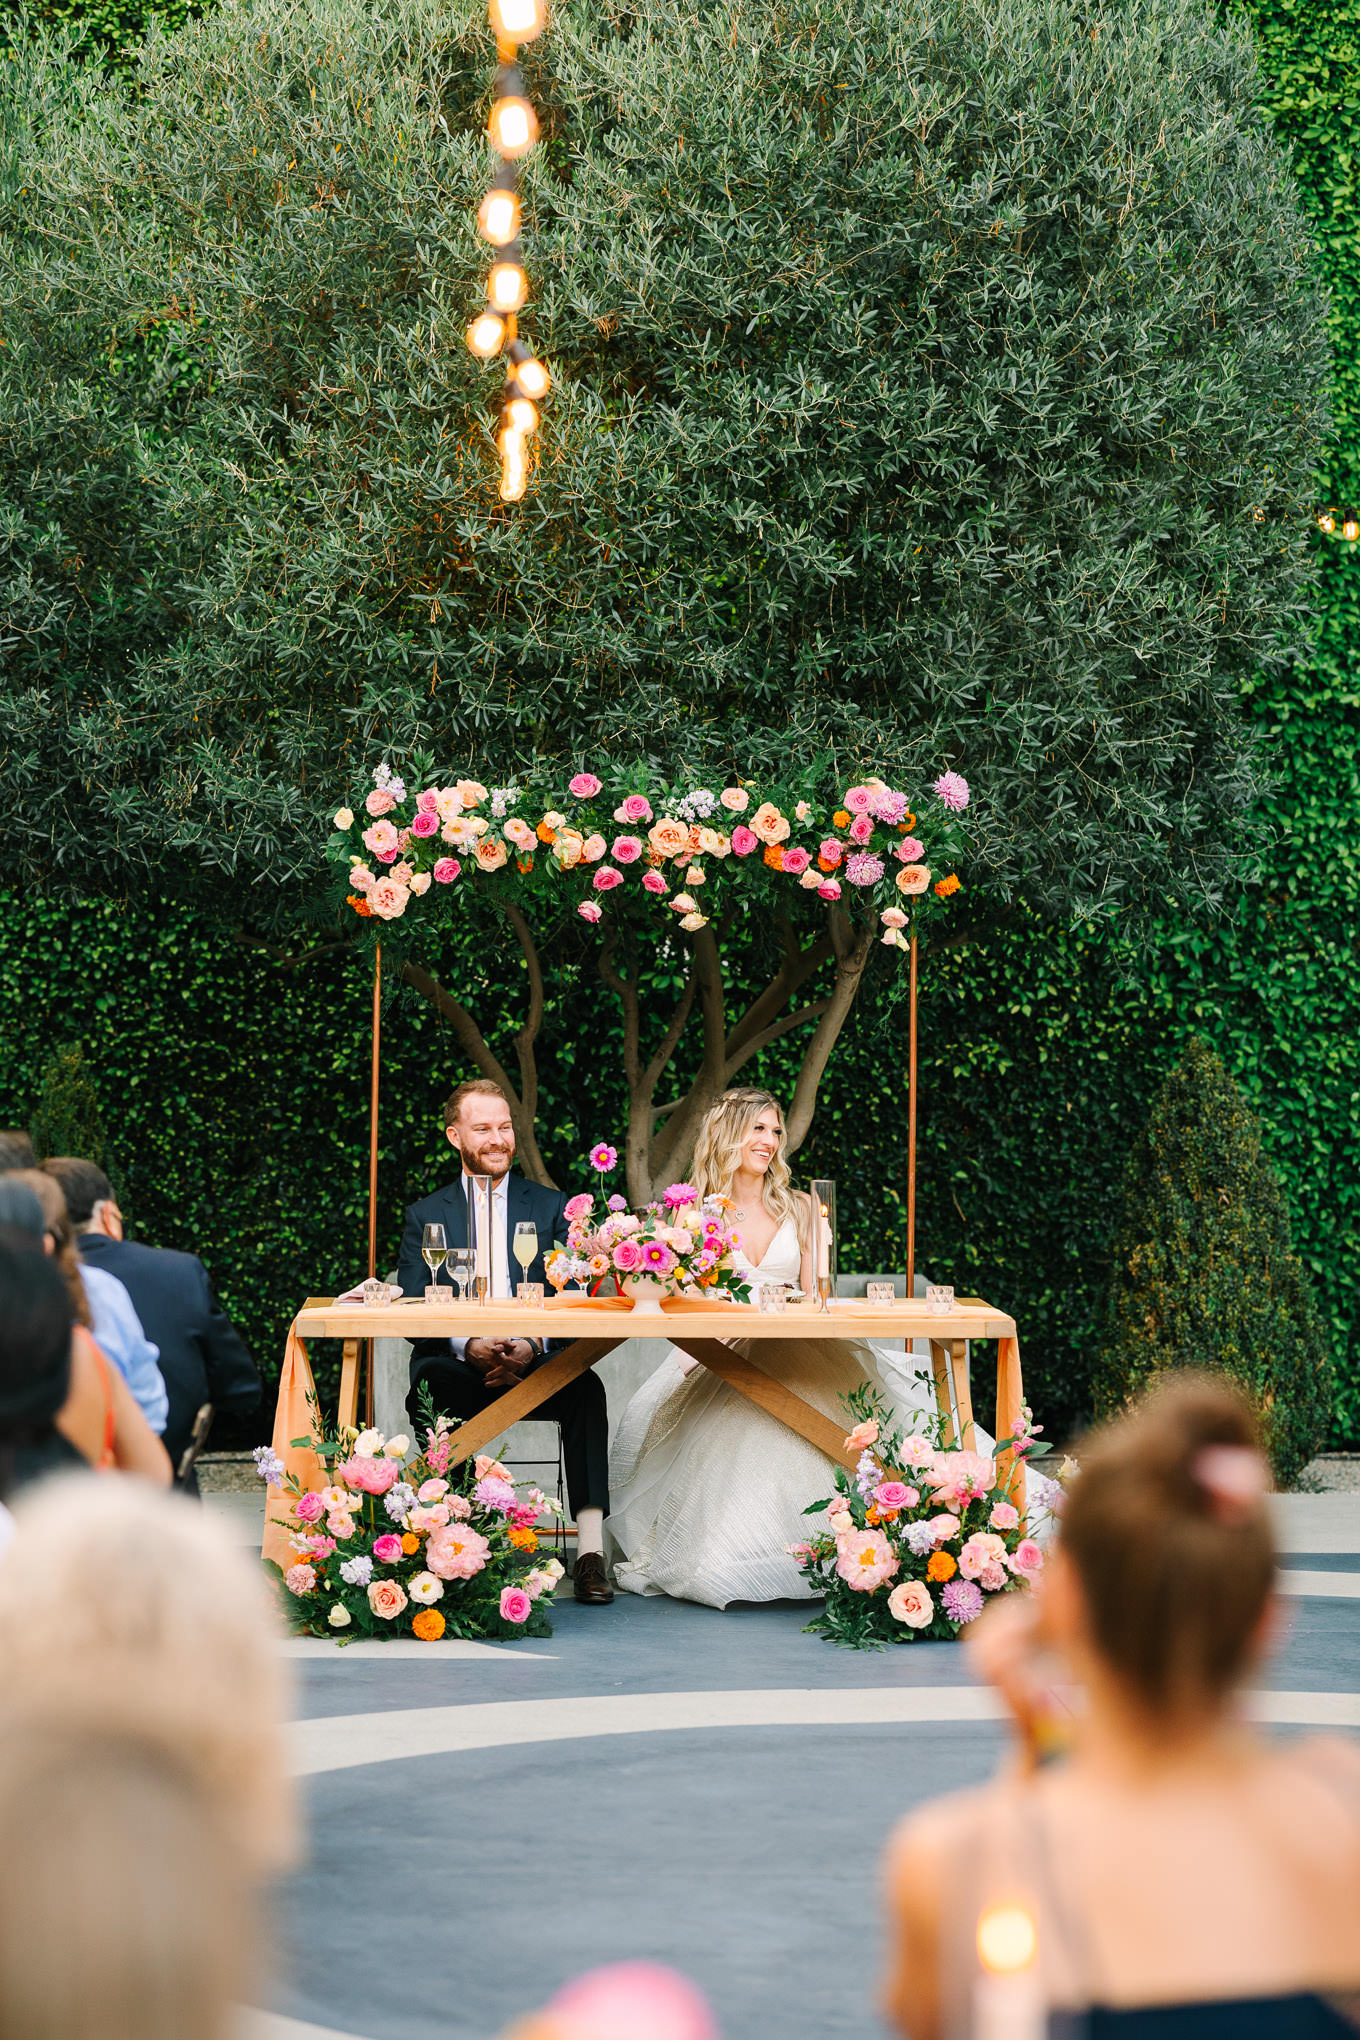 Fig House Los Angeles wedding | Wedding and elopement photography roundup | Los Angeles and Palm Springs  photographer | #losangeleswedding #palmspringswedding #elopementphotographer

Source: Mary Costa Photography | Los Angeles